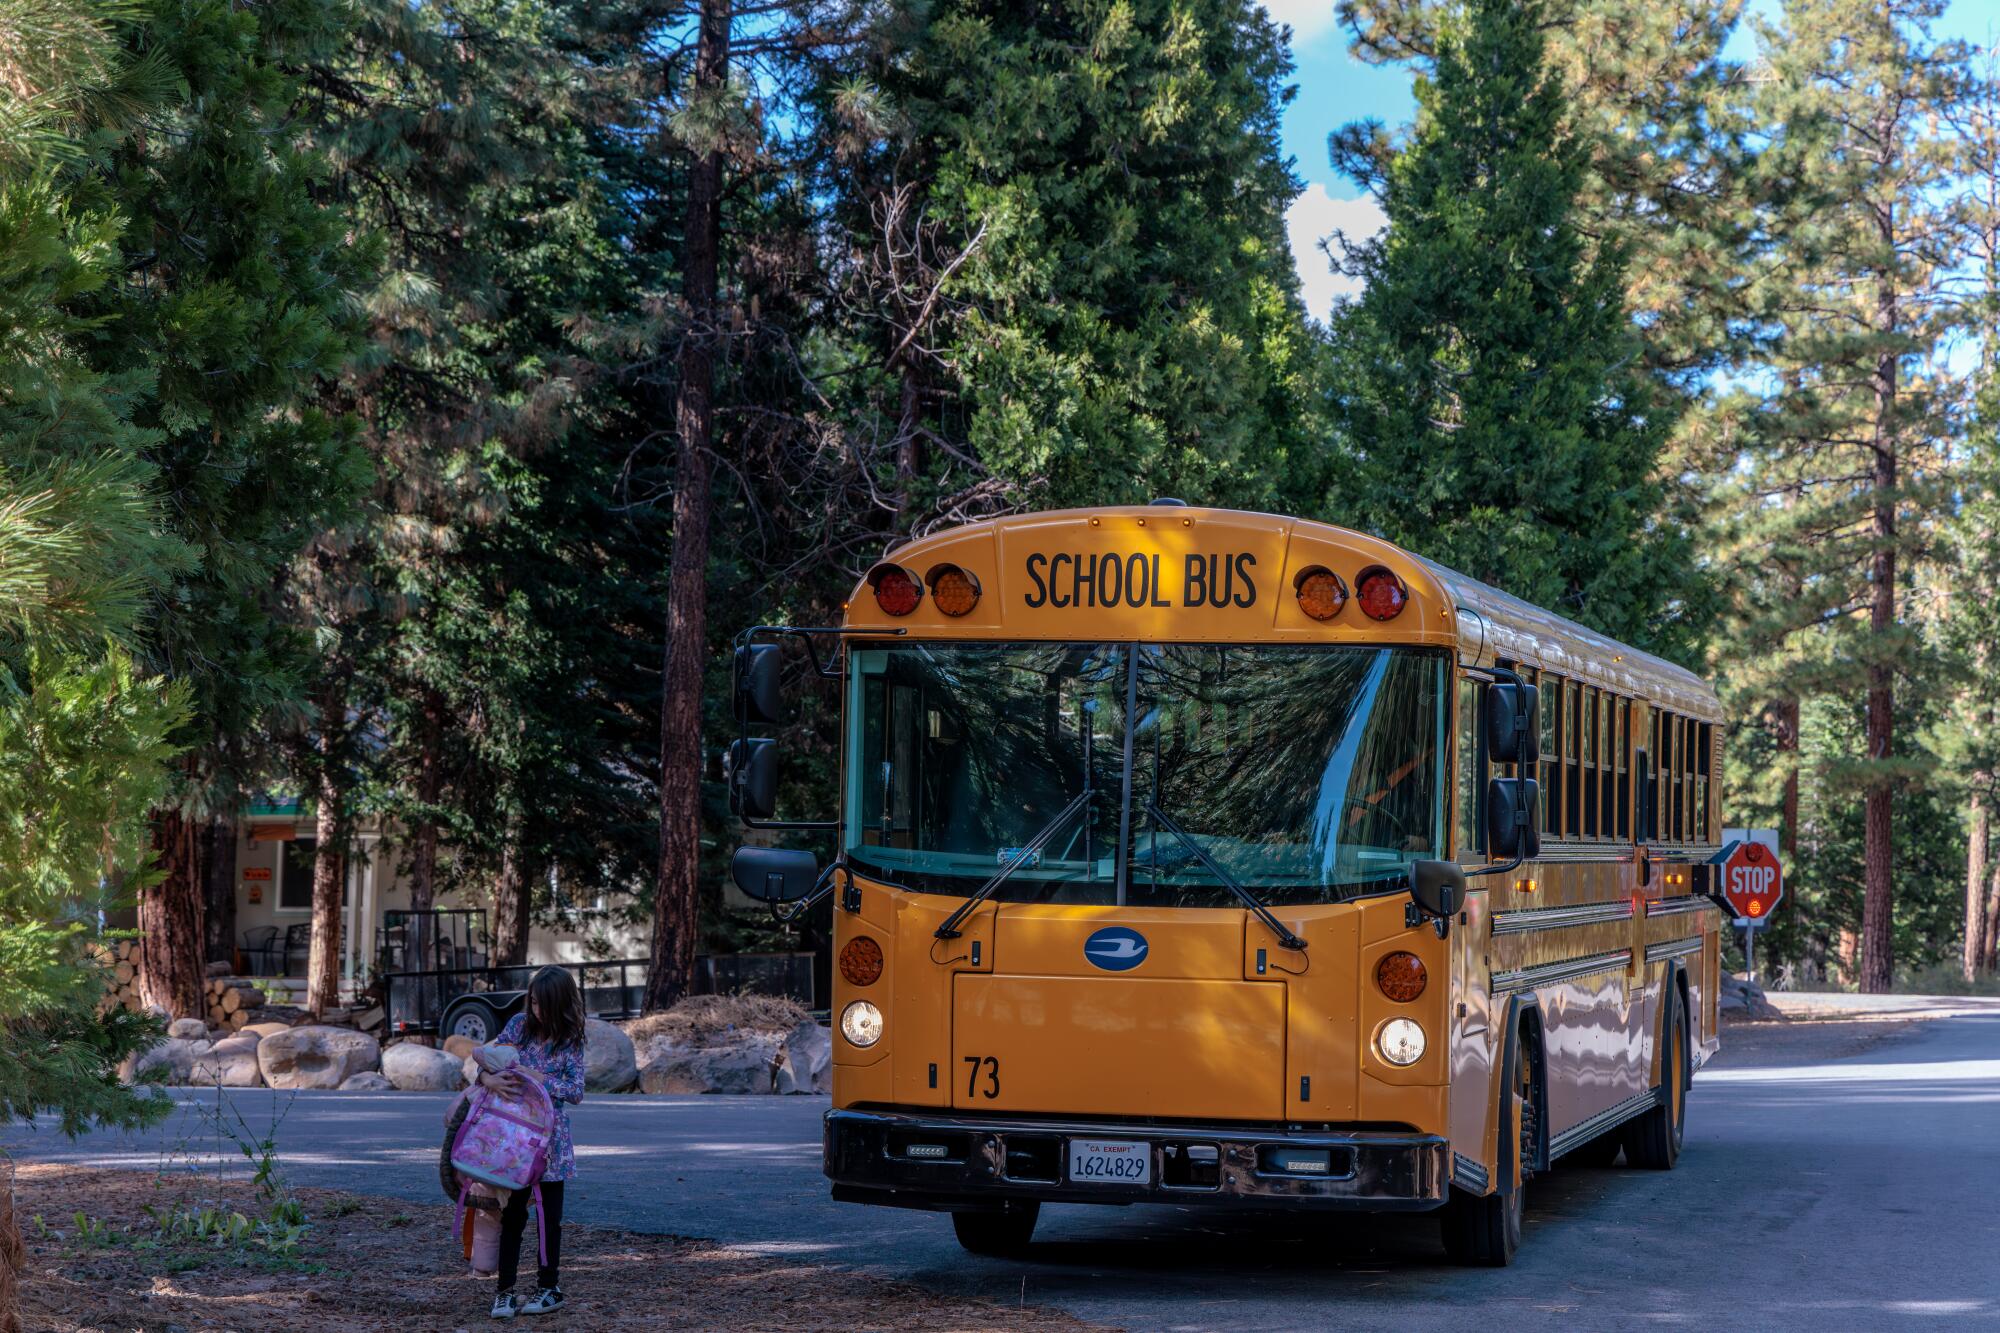 A child stands near a bus along a road through pine trees.